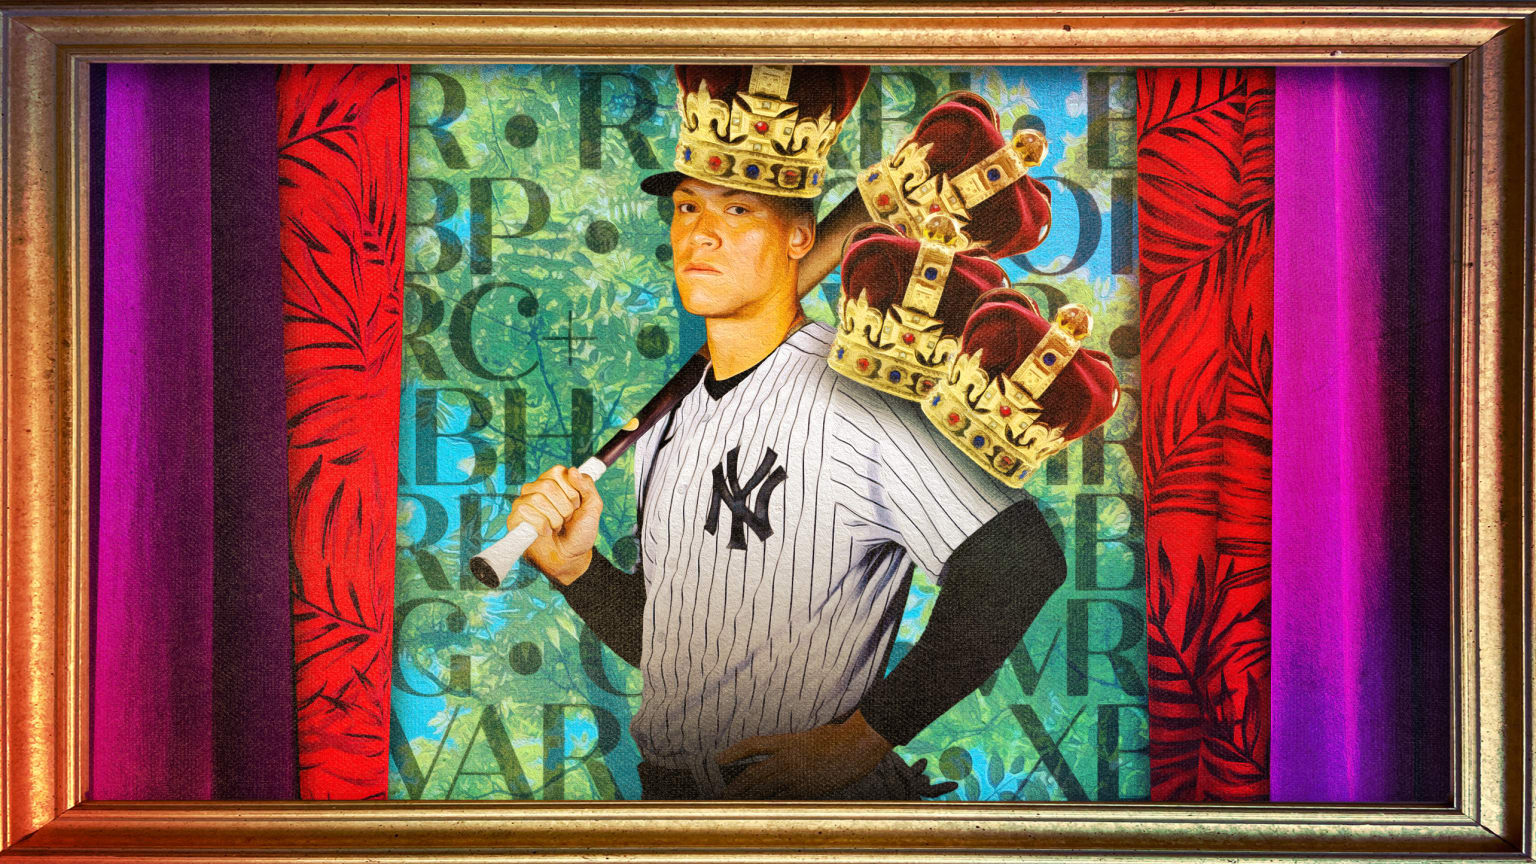 A designed image showing a posed Aaron Judge with a crown on his head holding a bat over his shoulder. Another crown hangs off the end of the bat, with two more perched on his left shoulder